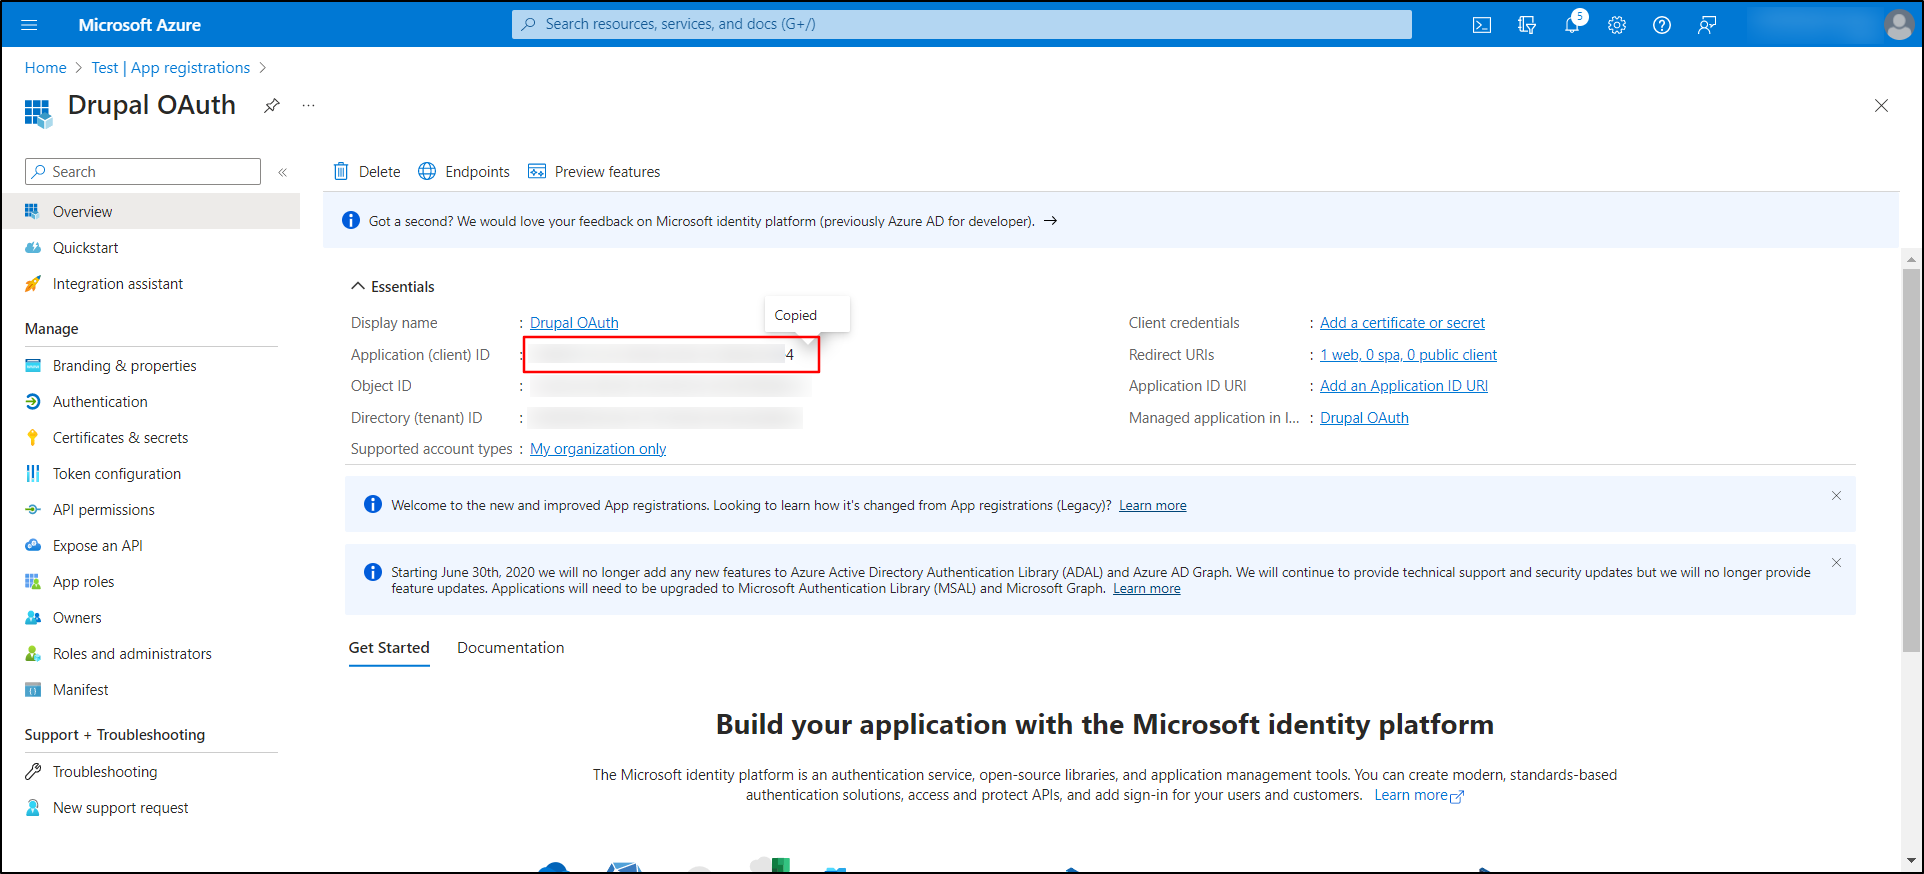 Microsoft Azure OAuth Single Sign-On - Copy the Application (client) ID